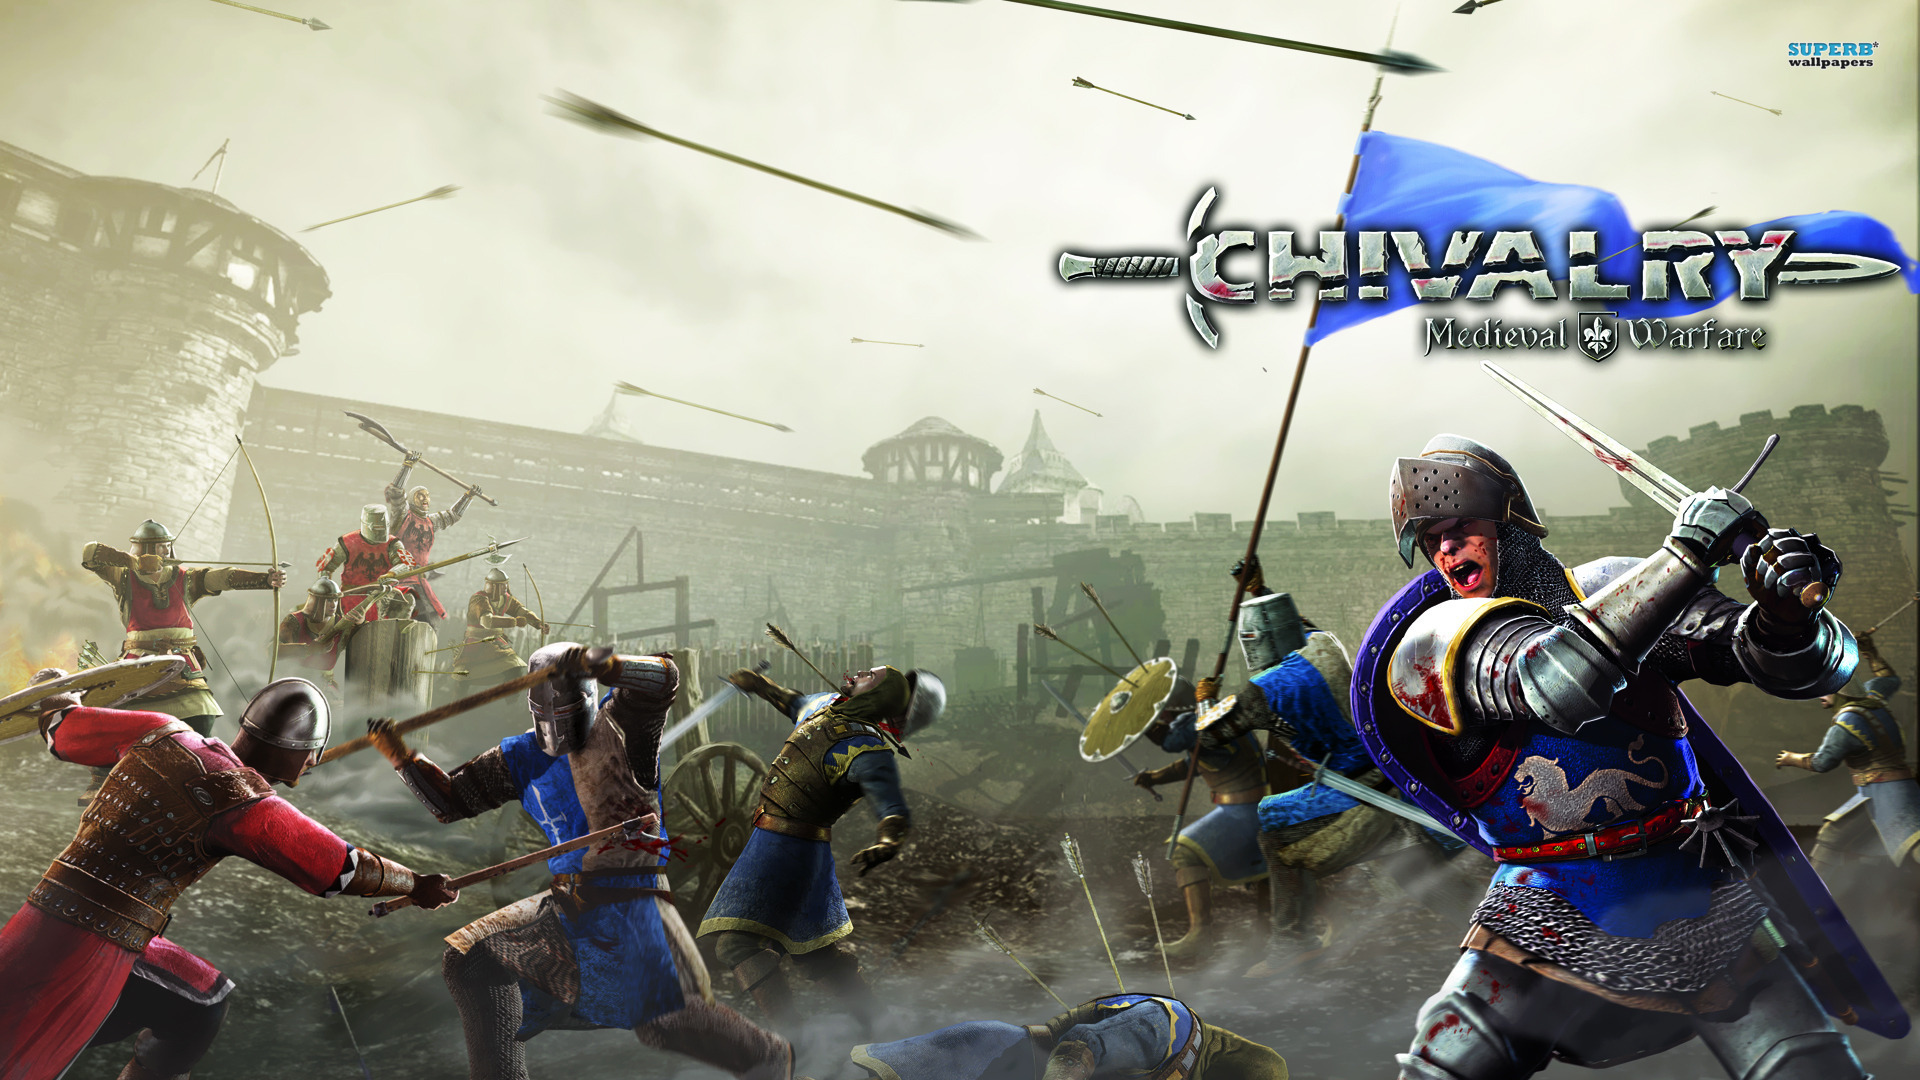 Chivalry Medieval Warfare Wallpapers